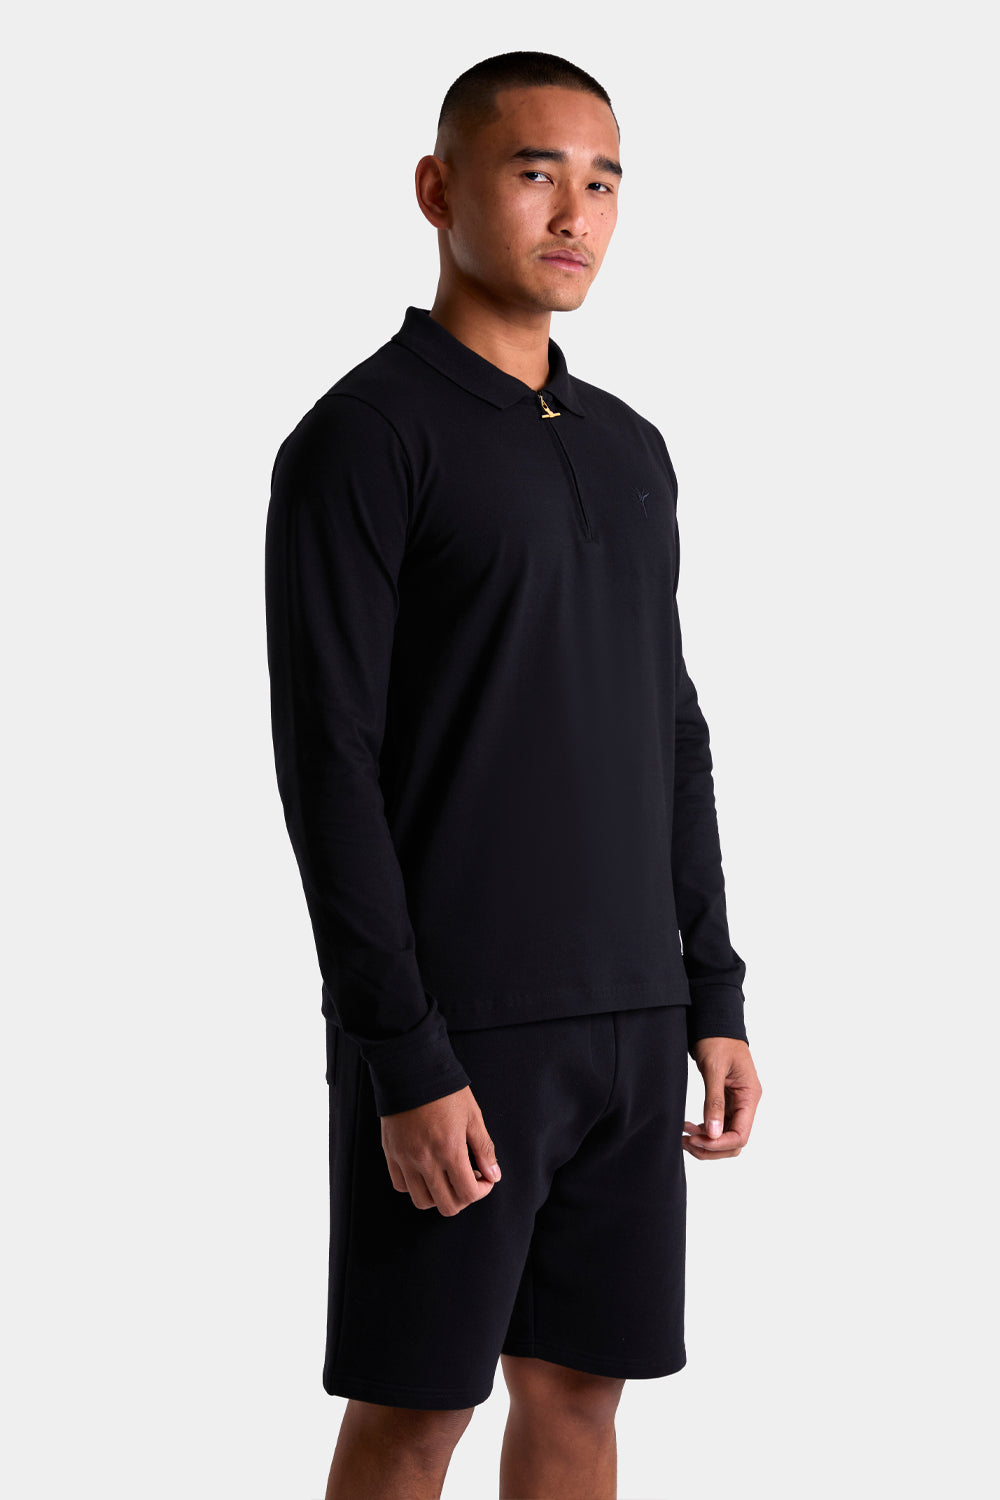 Buy the Android Homme Embroidered Long Sleeve Zip Polo Black at Intro. Spend £50 for free UK delivery. Official stockists. We ship worldwide.